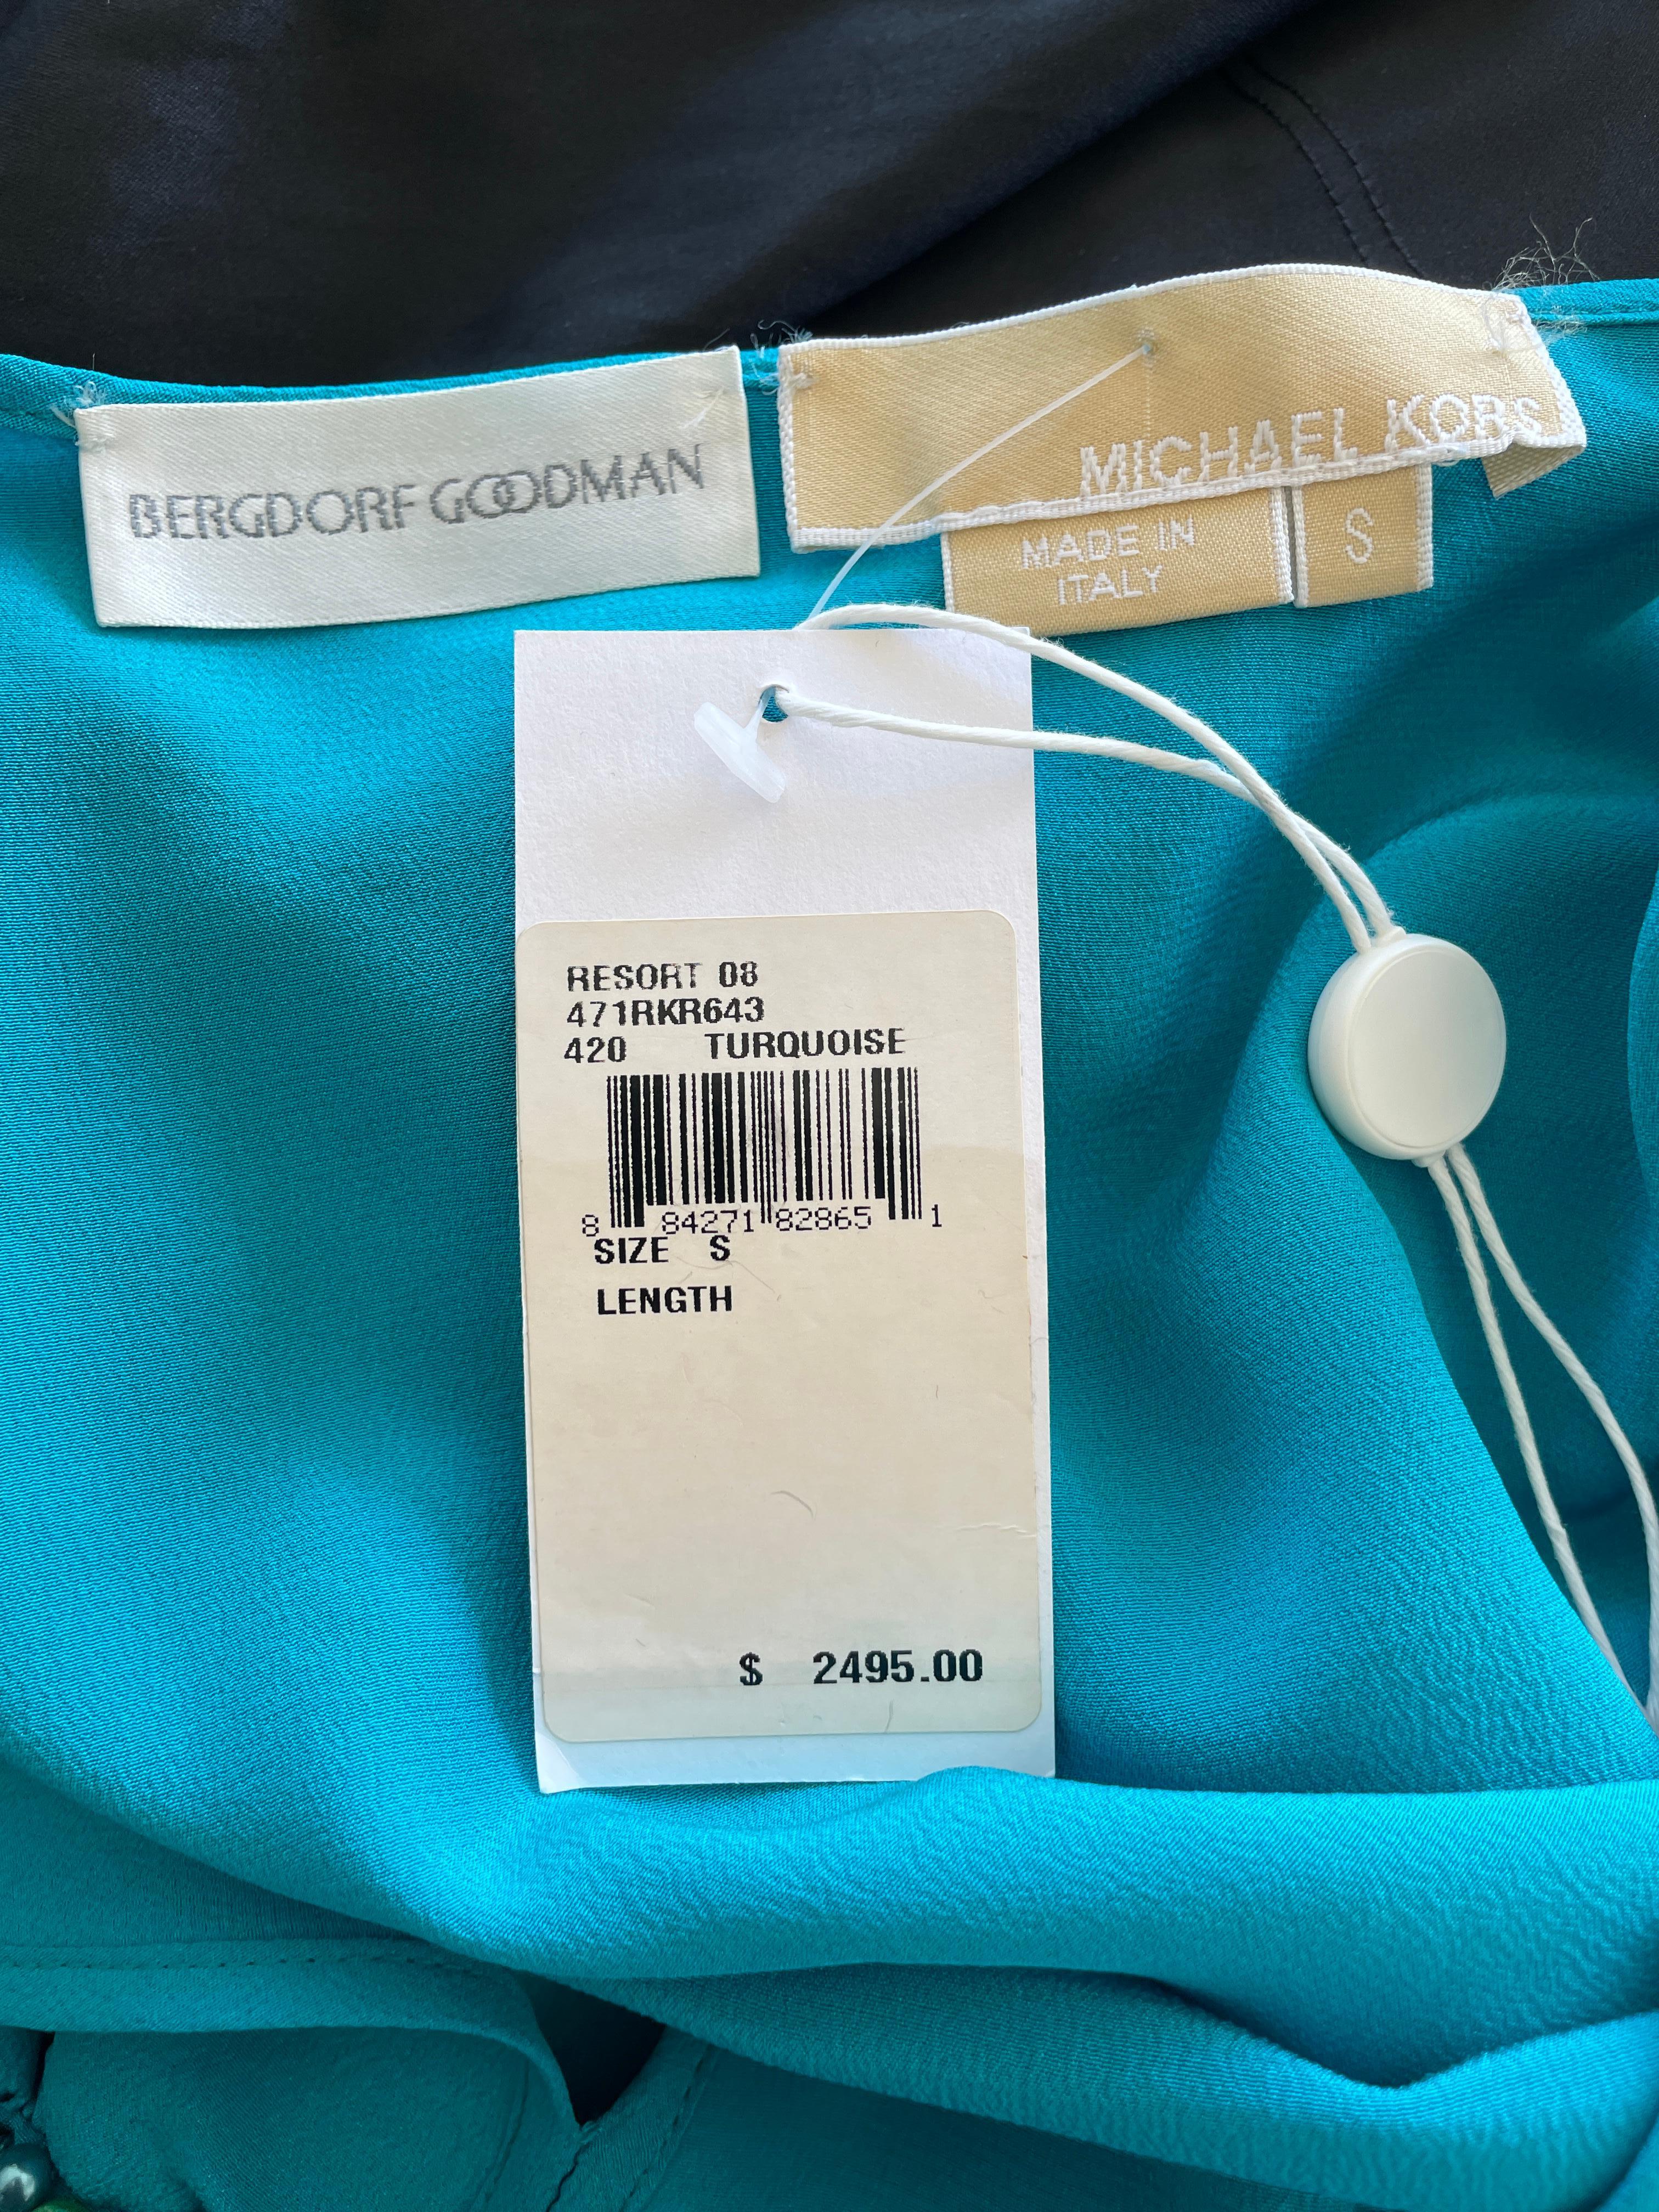 Michael Kors for Bergdorf Goodman Turquoise Embellished Caftan 
NWT, this retailed for $2495
 Size Small, but it's really one size fits all
Bust 40